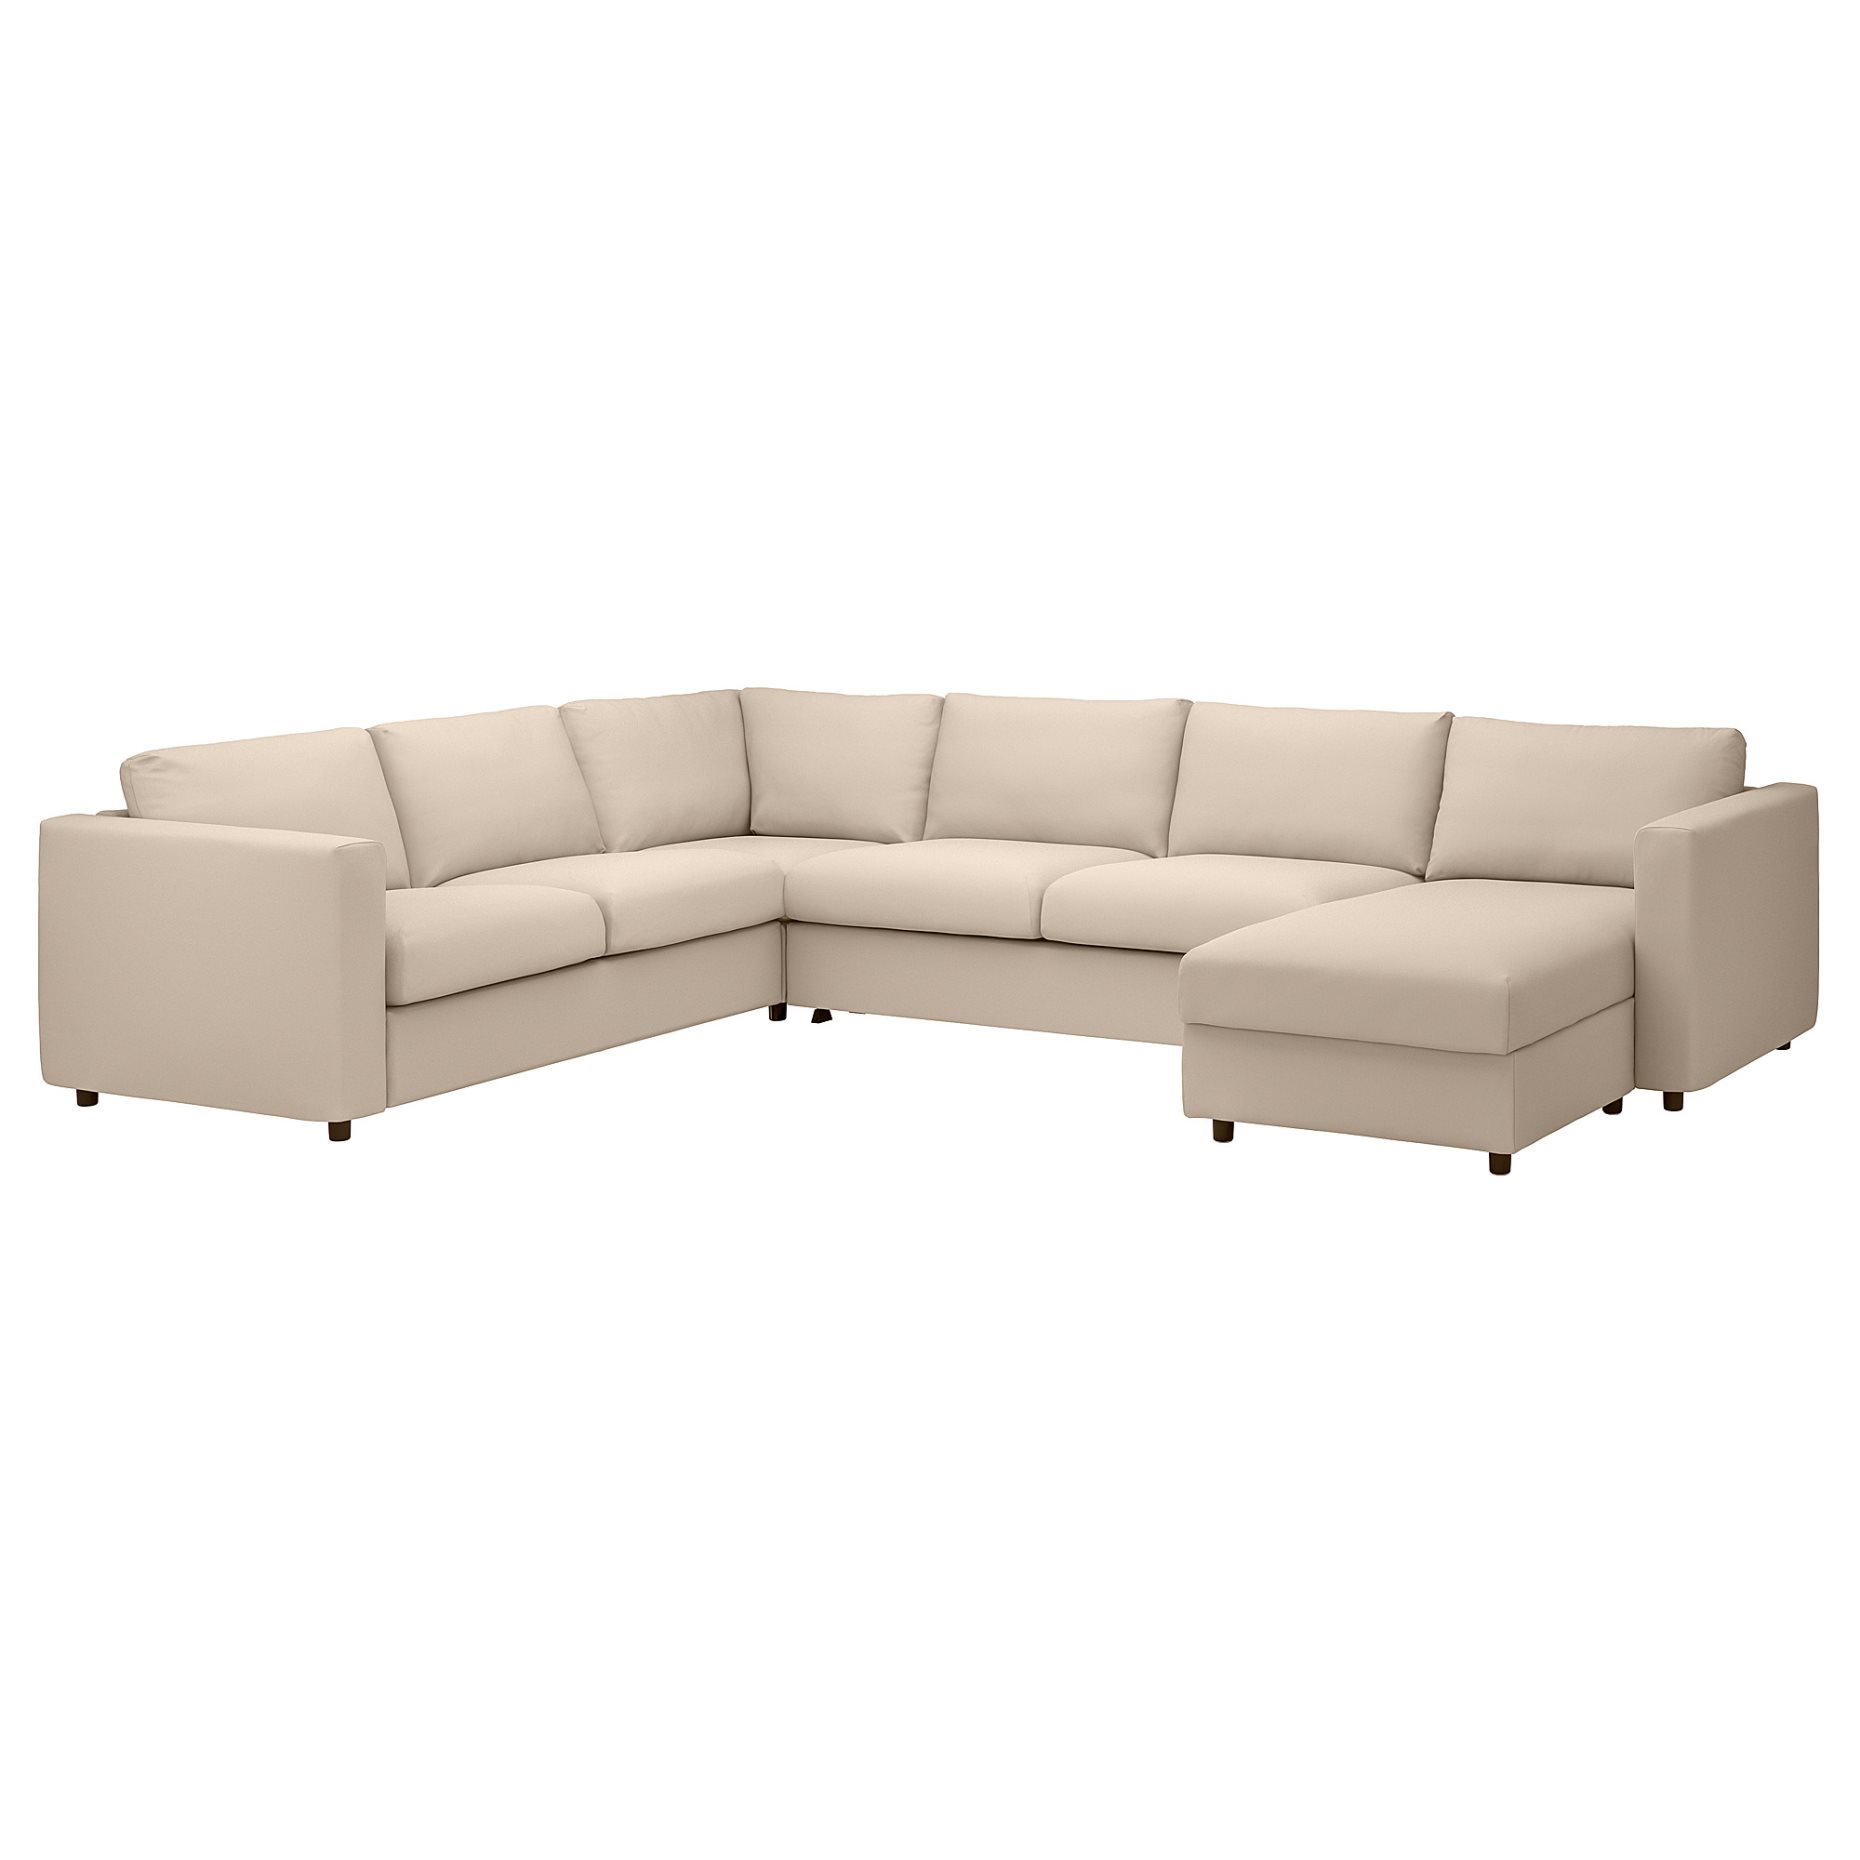 VIMLE, corner sofa-bed, 5-seat with chaise longue, 295.370.05